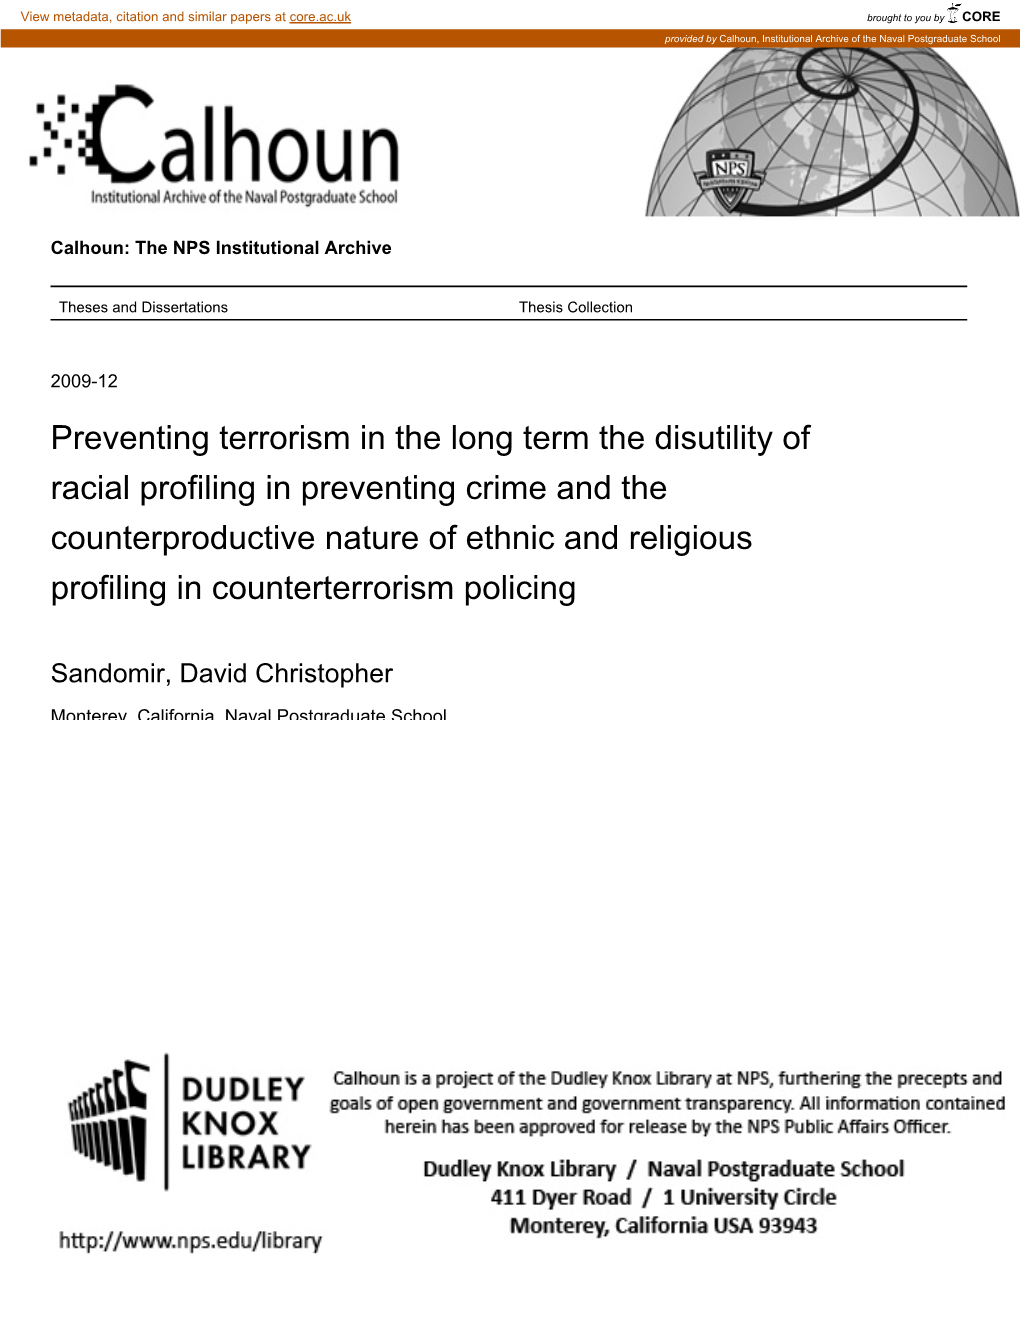 Preventing Terrorism in the Long Term the Disutility of Racial Profiling in Preventing Crime and the Counterproductive Nature Of